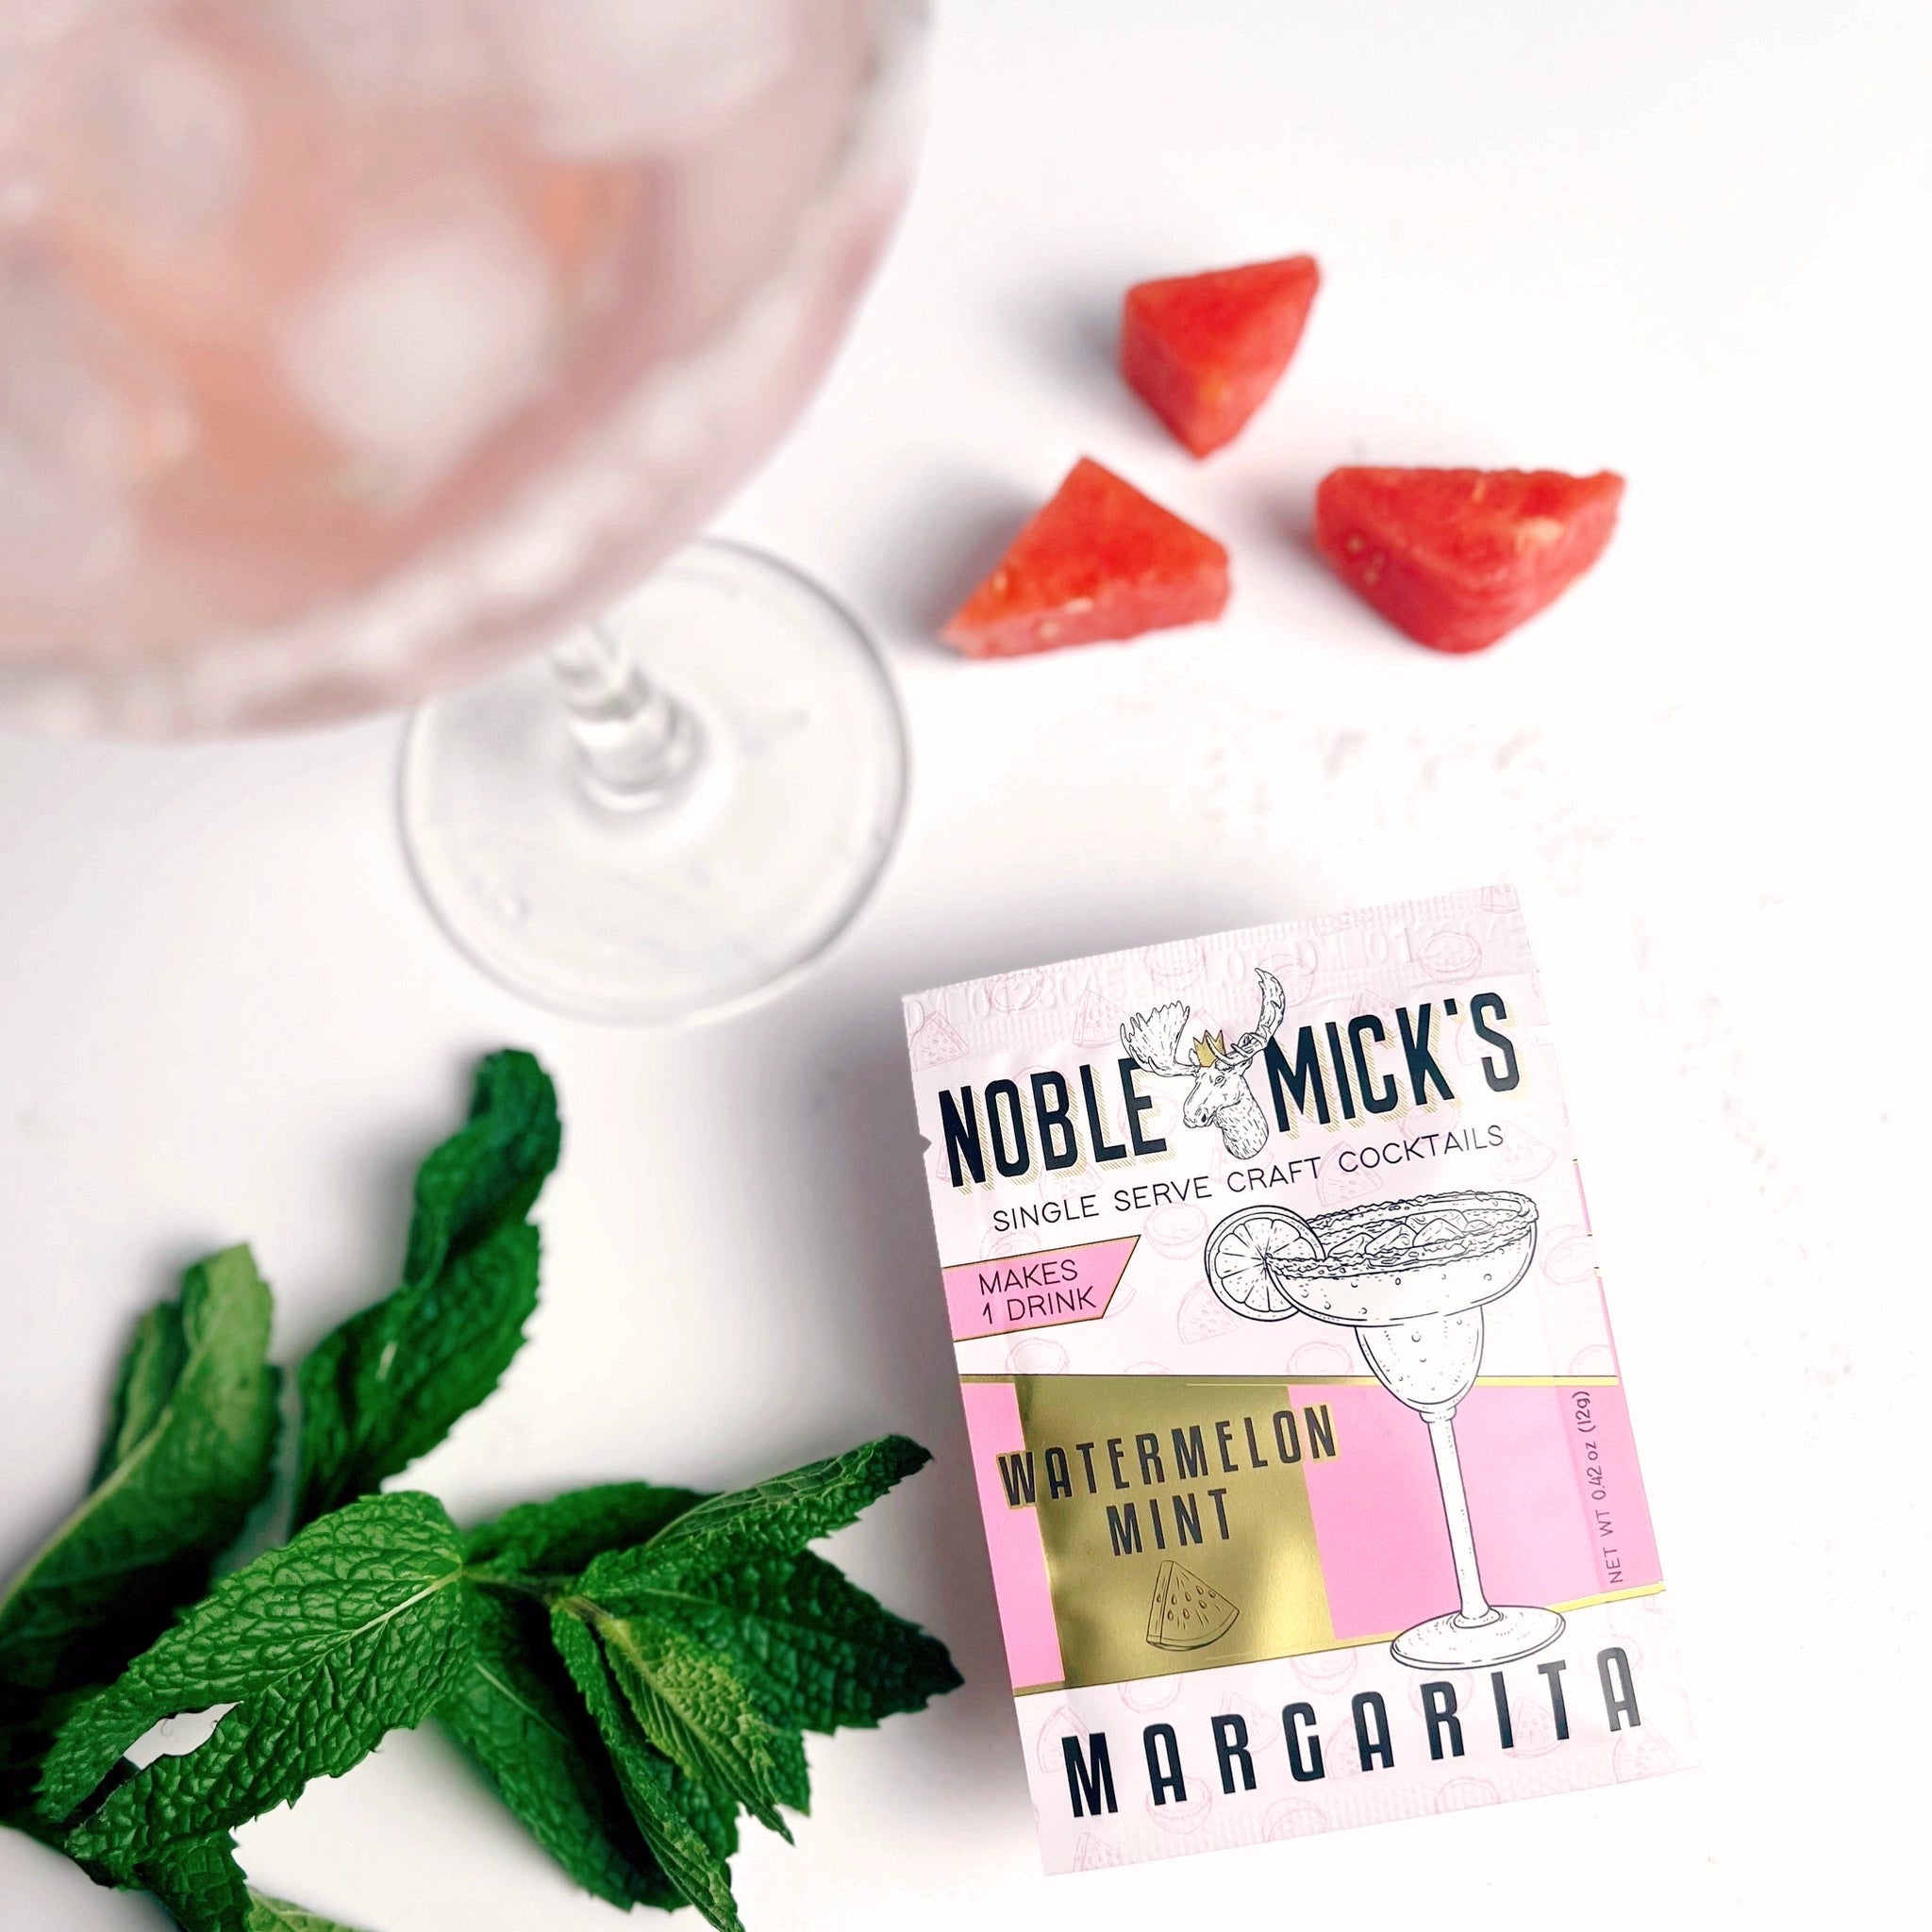 On a white background is a packet of cocktail mix in a white and hot pink packaging that has an illustration of a margarita glass along with black text that reads, "Noble Micks Single Serve Craft Cocktails, Watermelon Mint Margarita" photographed next to a couple slices of watermelon, mint and a cocktail glass with pink liquid inside. 